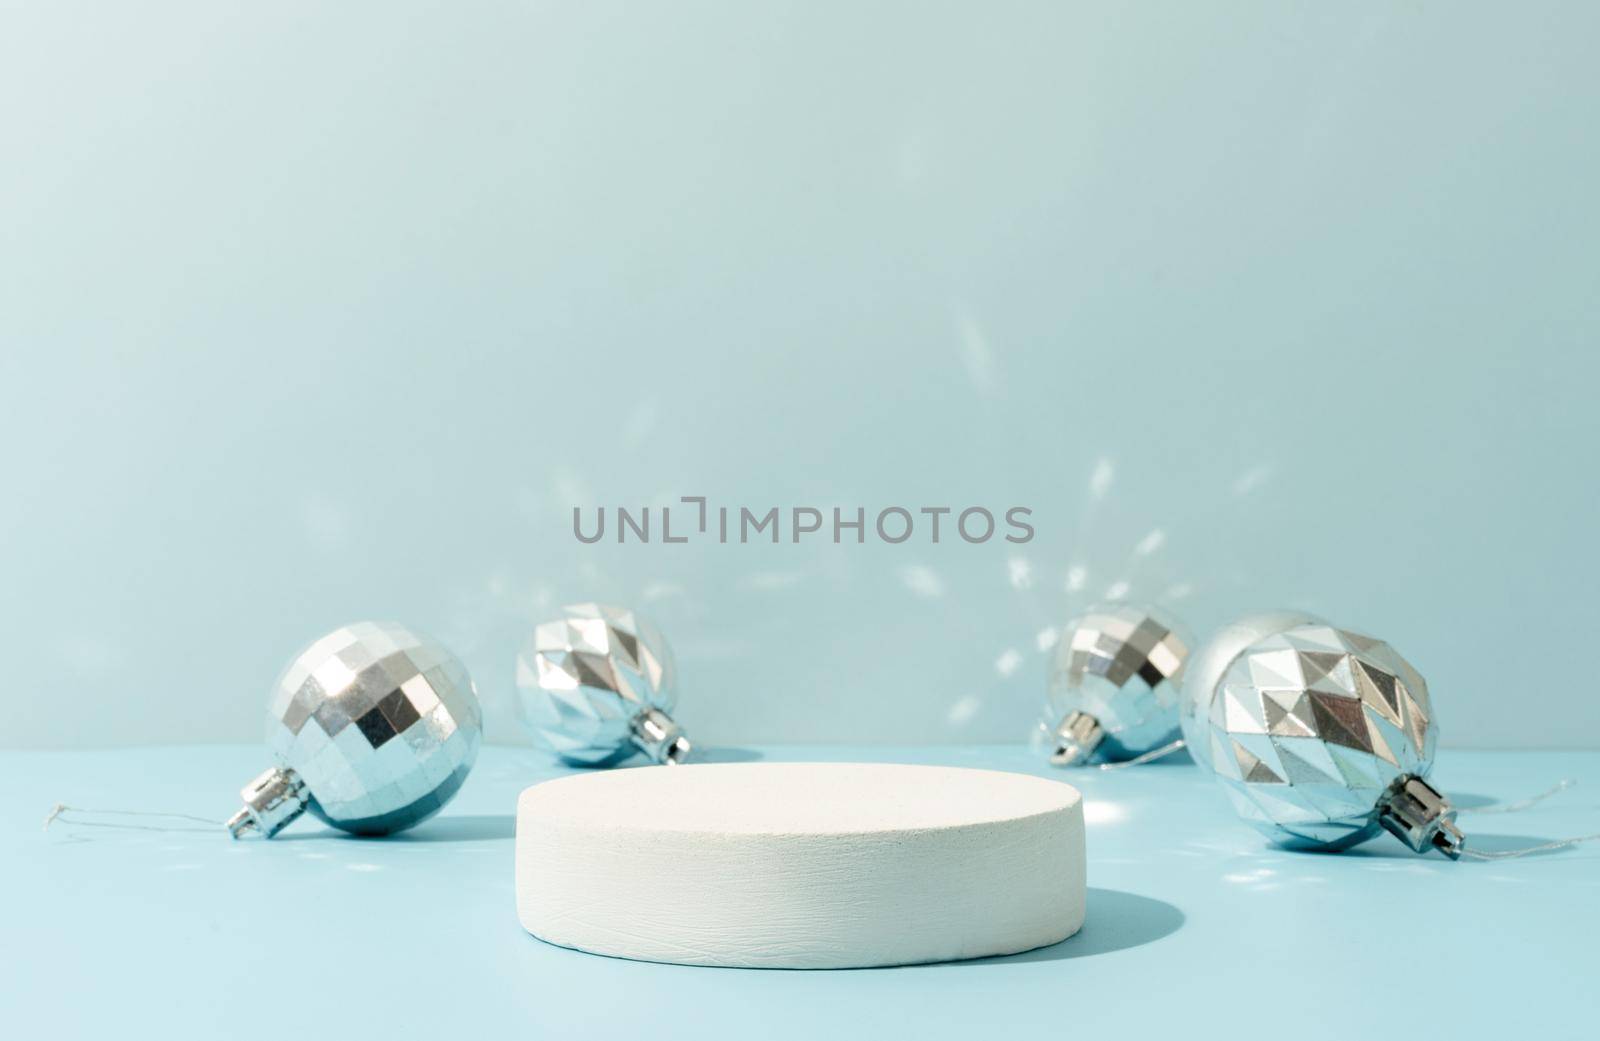 A minimalistic scene of a podium with christmas decorative balls on a light blue background by Desperada